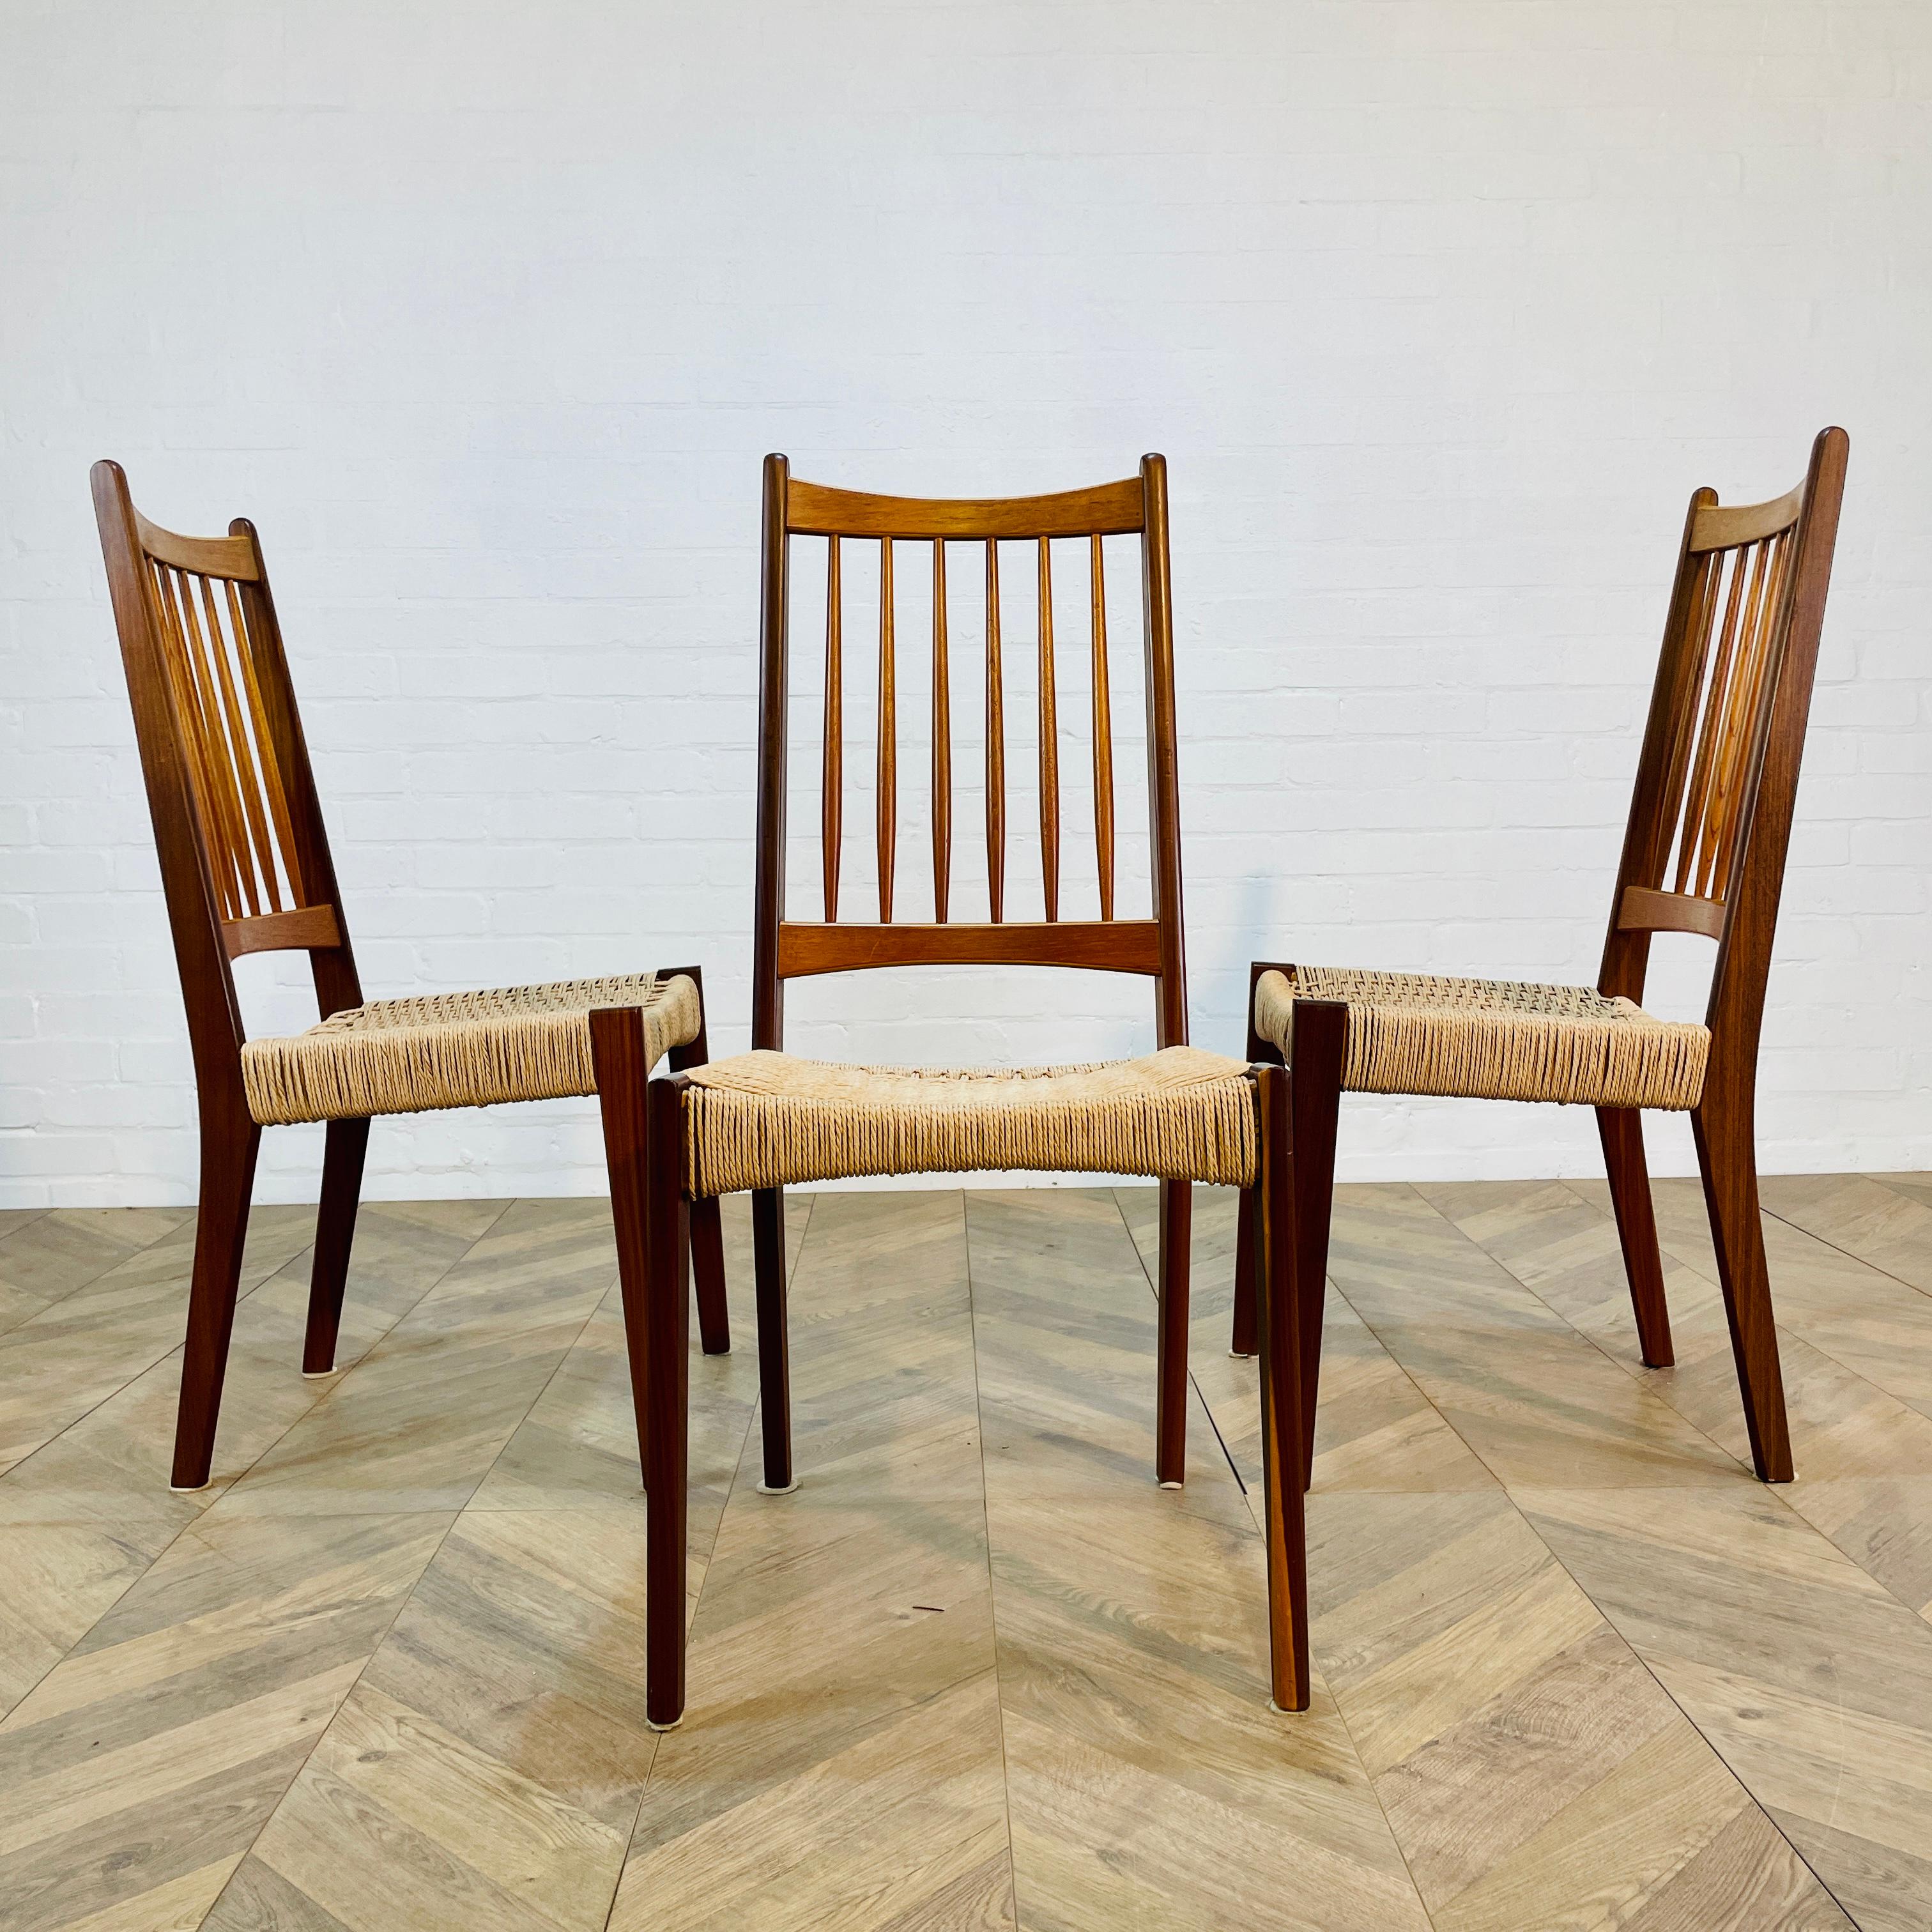 Set of 3 Beautiful Dining Chairs, Designed by Arne Hovmand Olsen for Mogens Kold in Denmark. Circa 1960s.

Teak framed with handwoven paper cord seating (not original). The cord is flexible so shapes to each person. The gently curved backrest offers